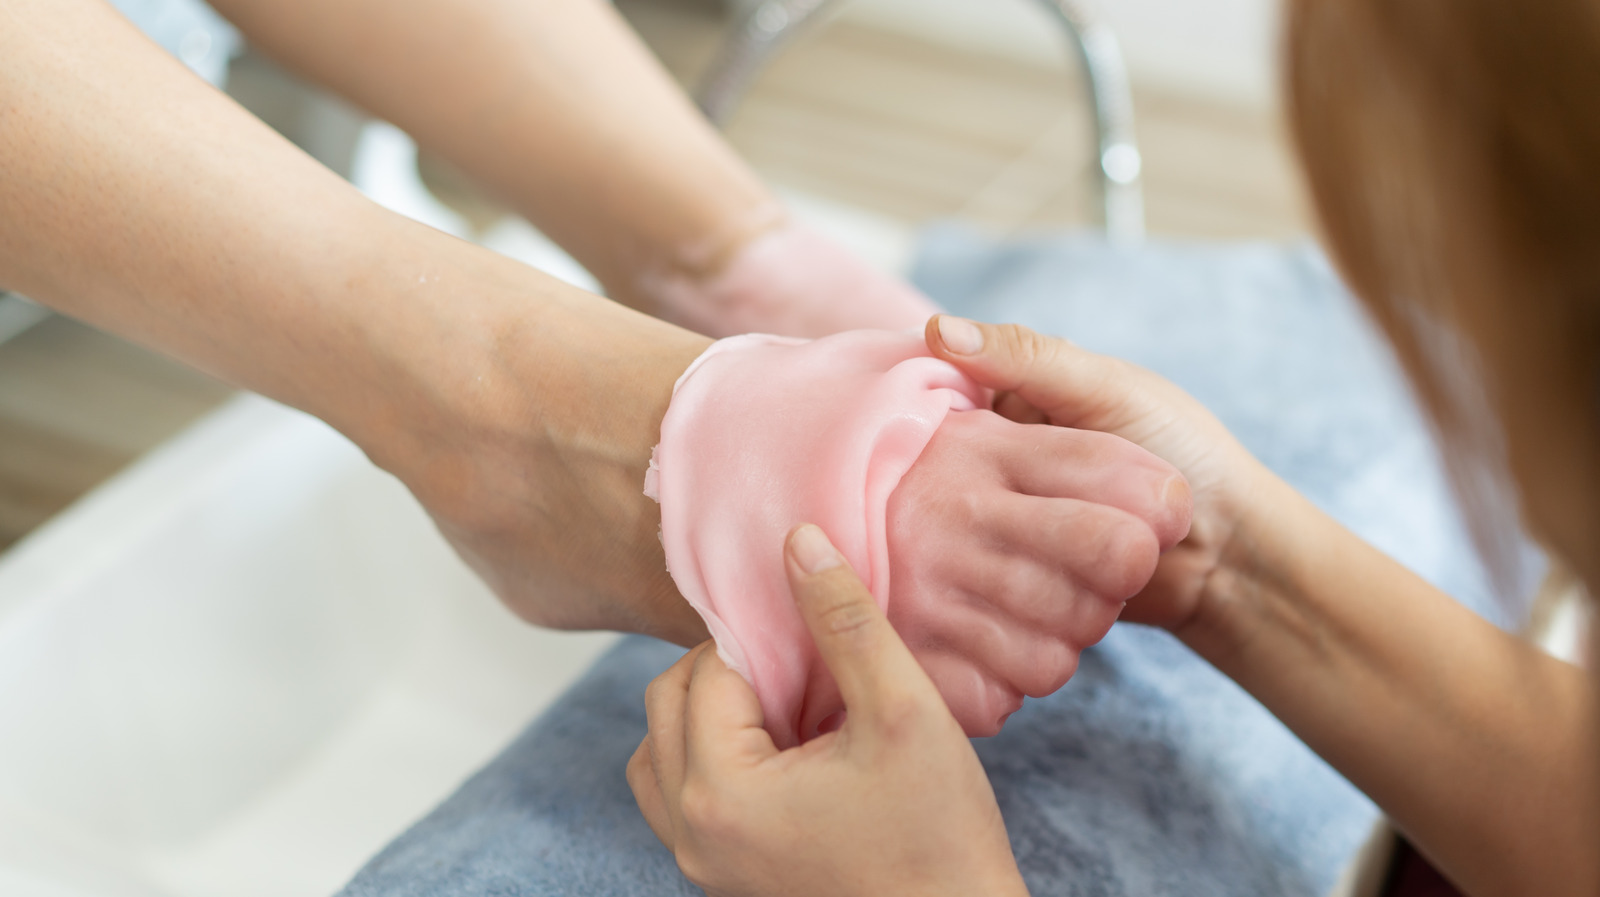 How Do Paraffin Manicures And Pedicures Benefit Your Skin?